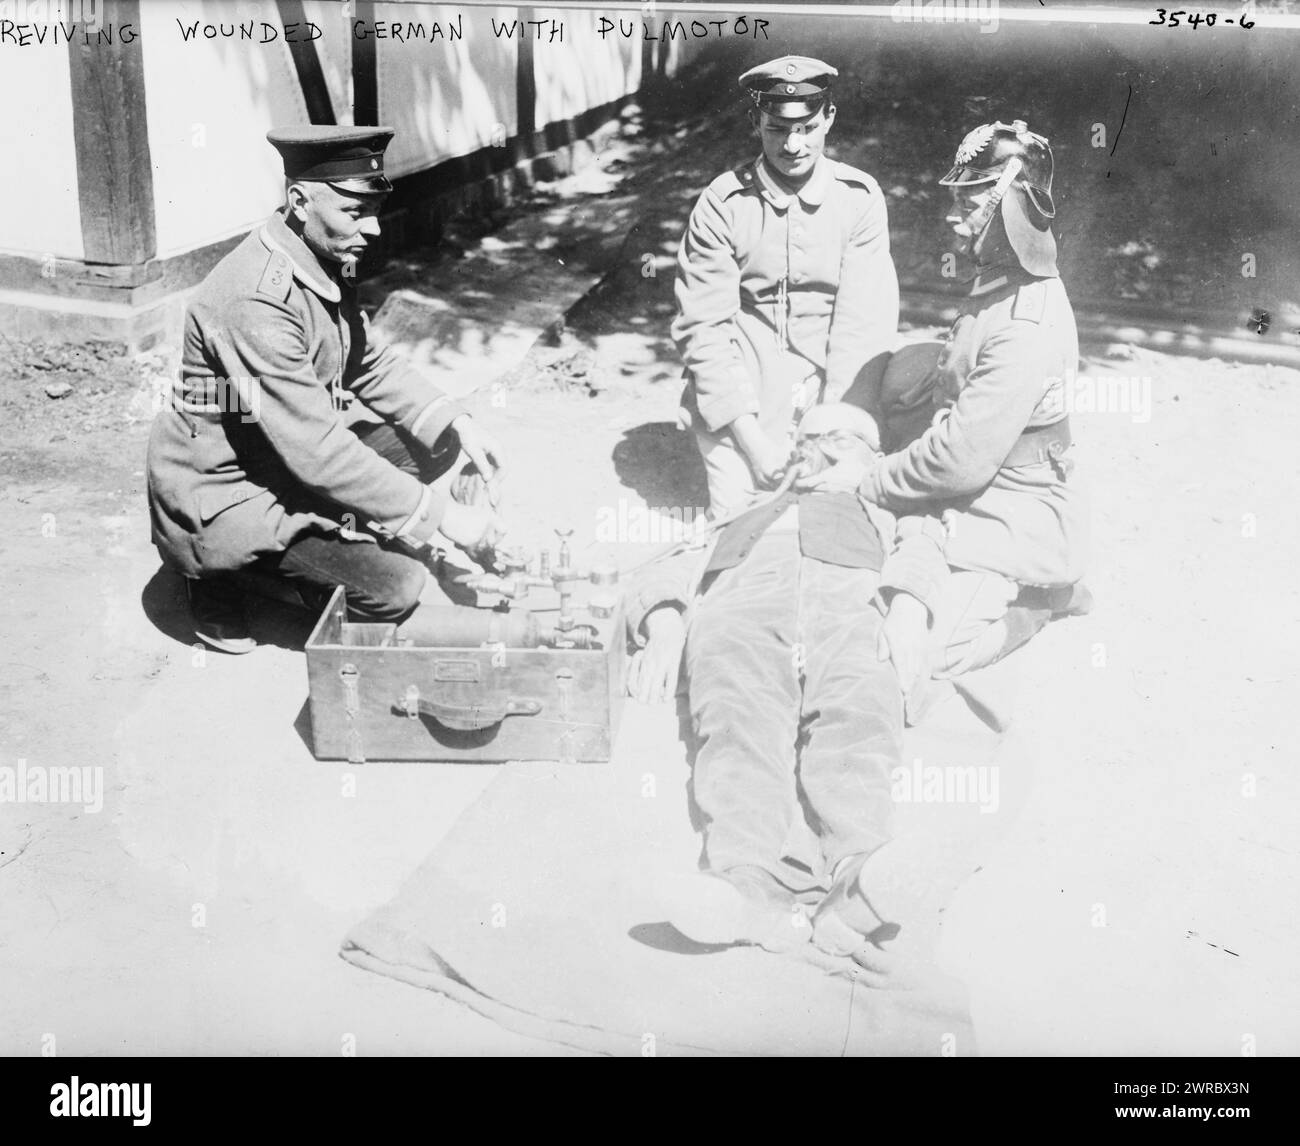 Reviving wounded German with Pulmotor, Photograph shows a German being revived with a Pulmotor, an artificial respiration device, during World War I., between 1914 and ca. 1915, World War, 1914-1918, Glass negatives, 1 negative: glass Stock Photo